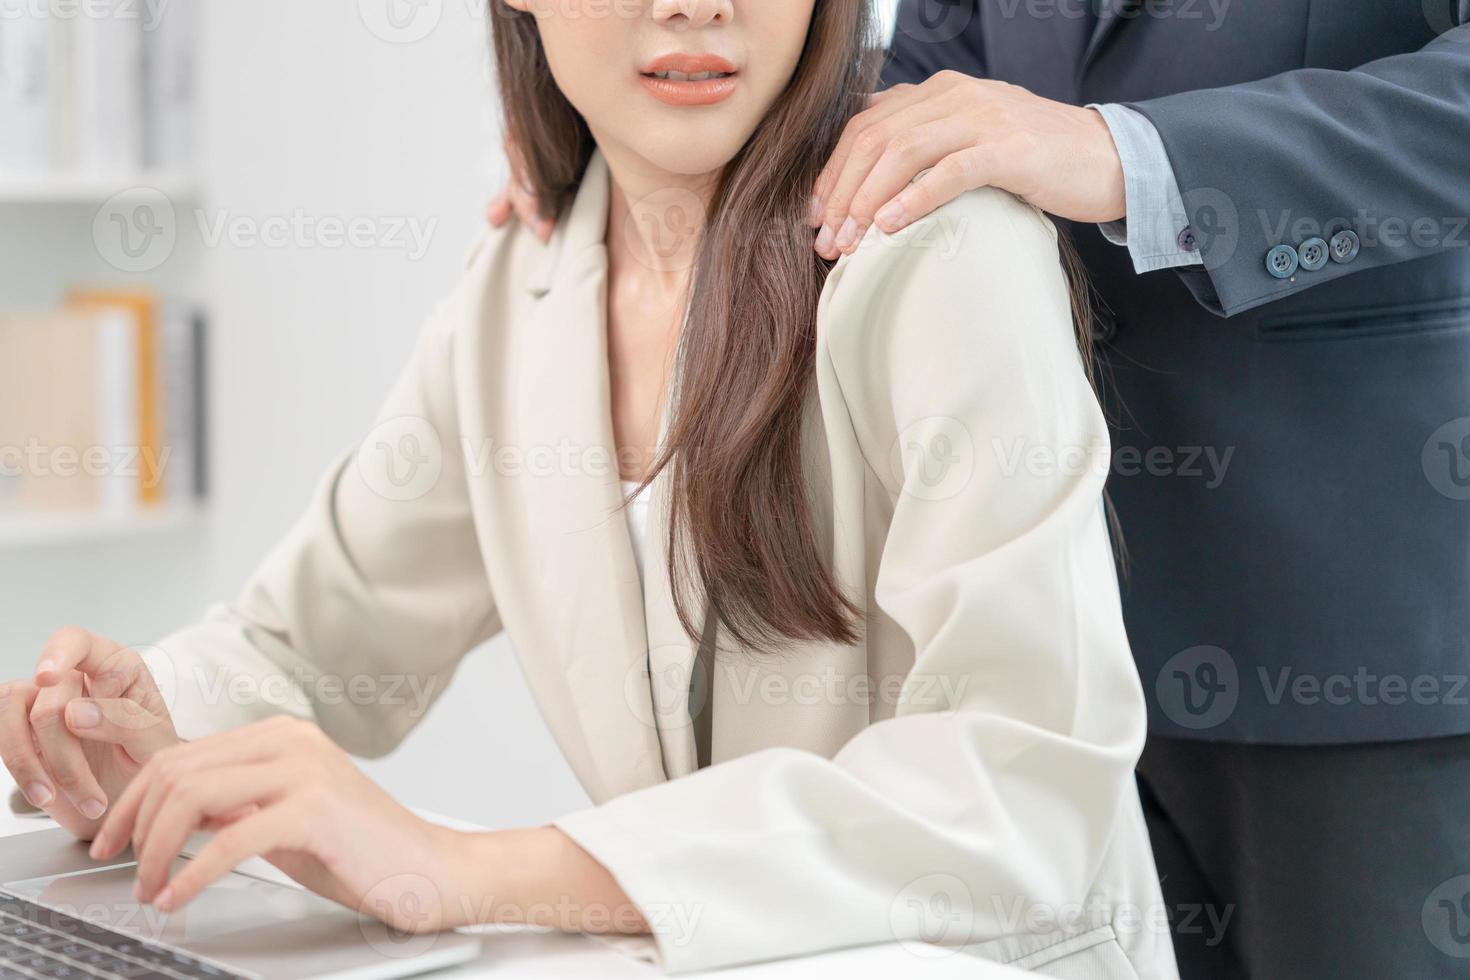 businessman sexually harassed a female colleague by touch her shoulder. Sexual harassment in office. Women feel anxious and stressed from being harassed. molest, assault, inappropriate, discrimination photo